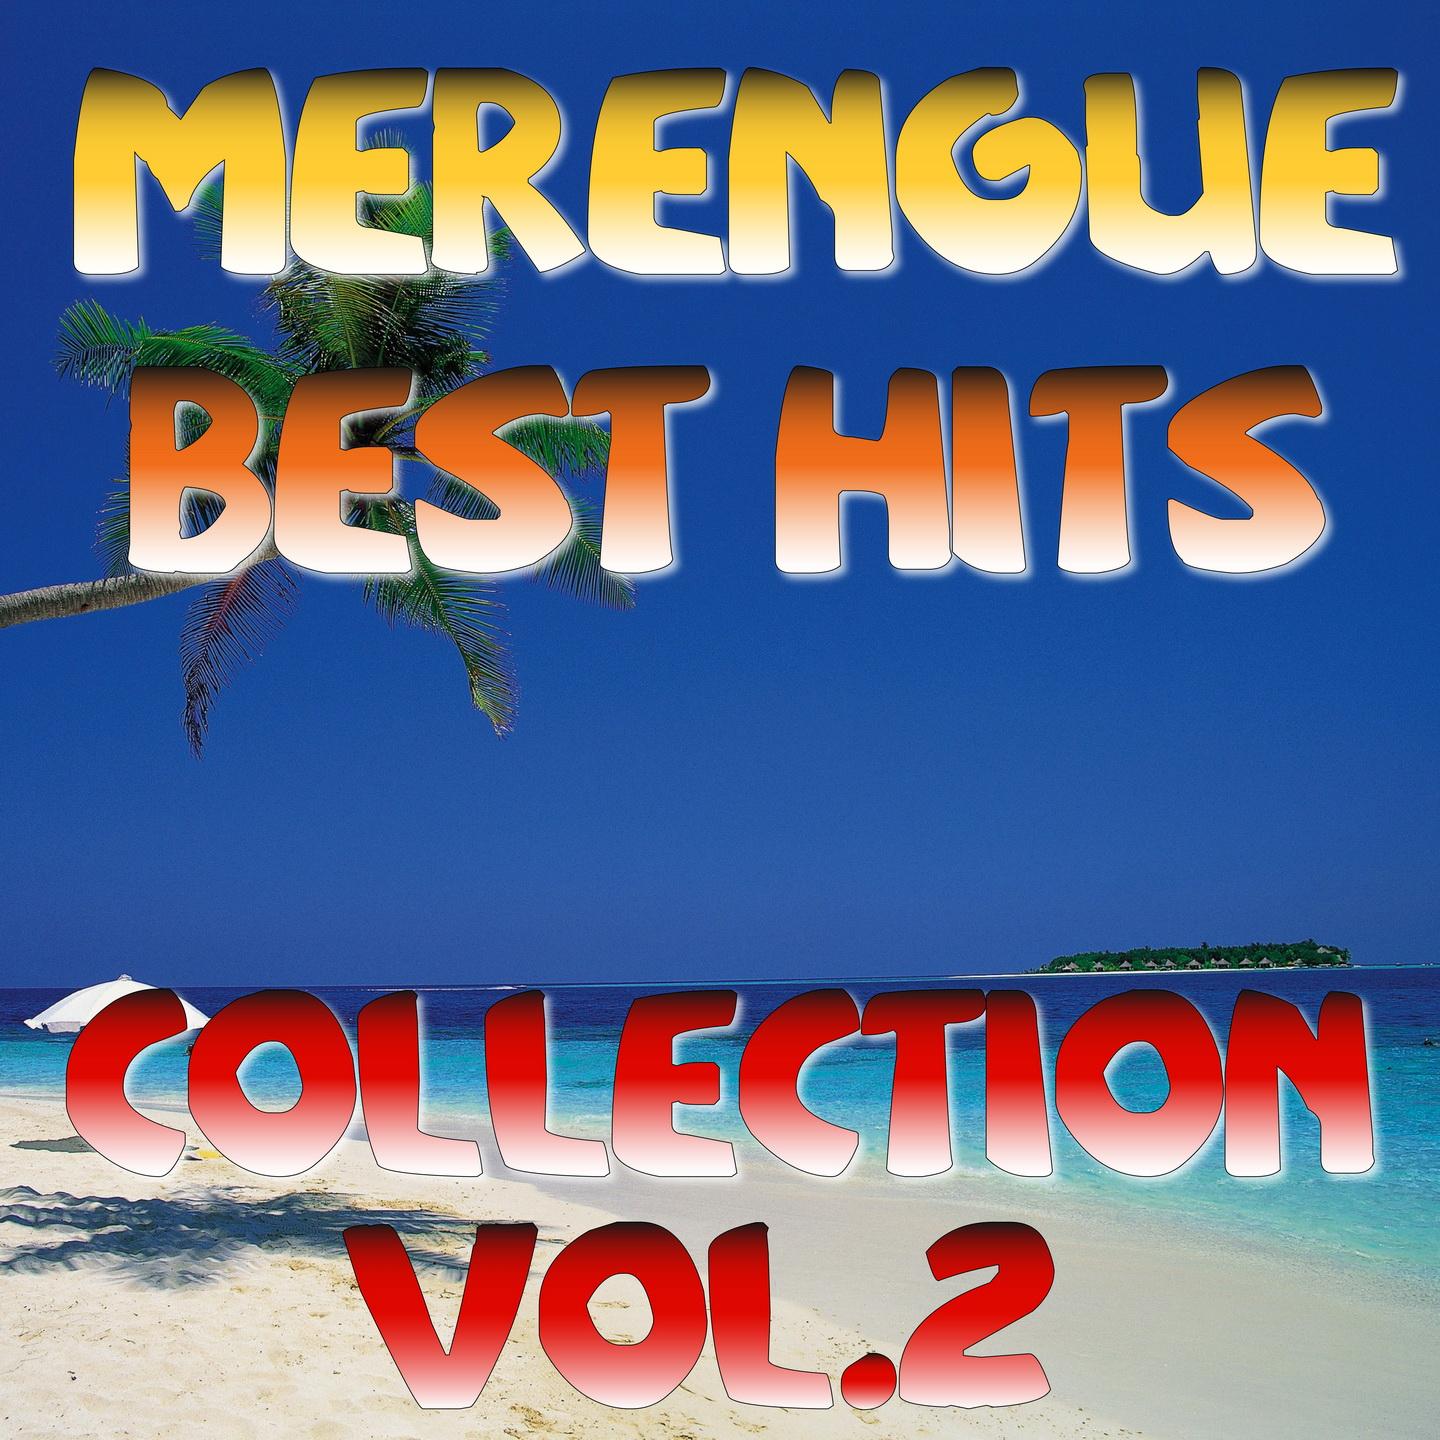 Merengue Best Hits Collection, Vol. 2